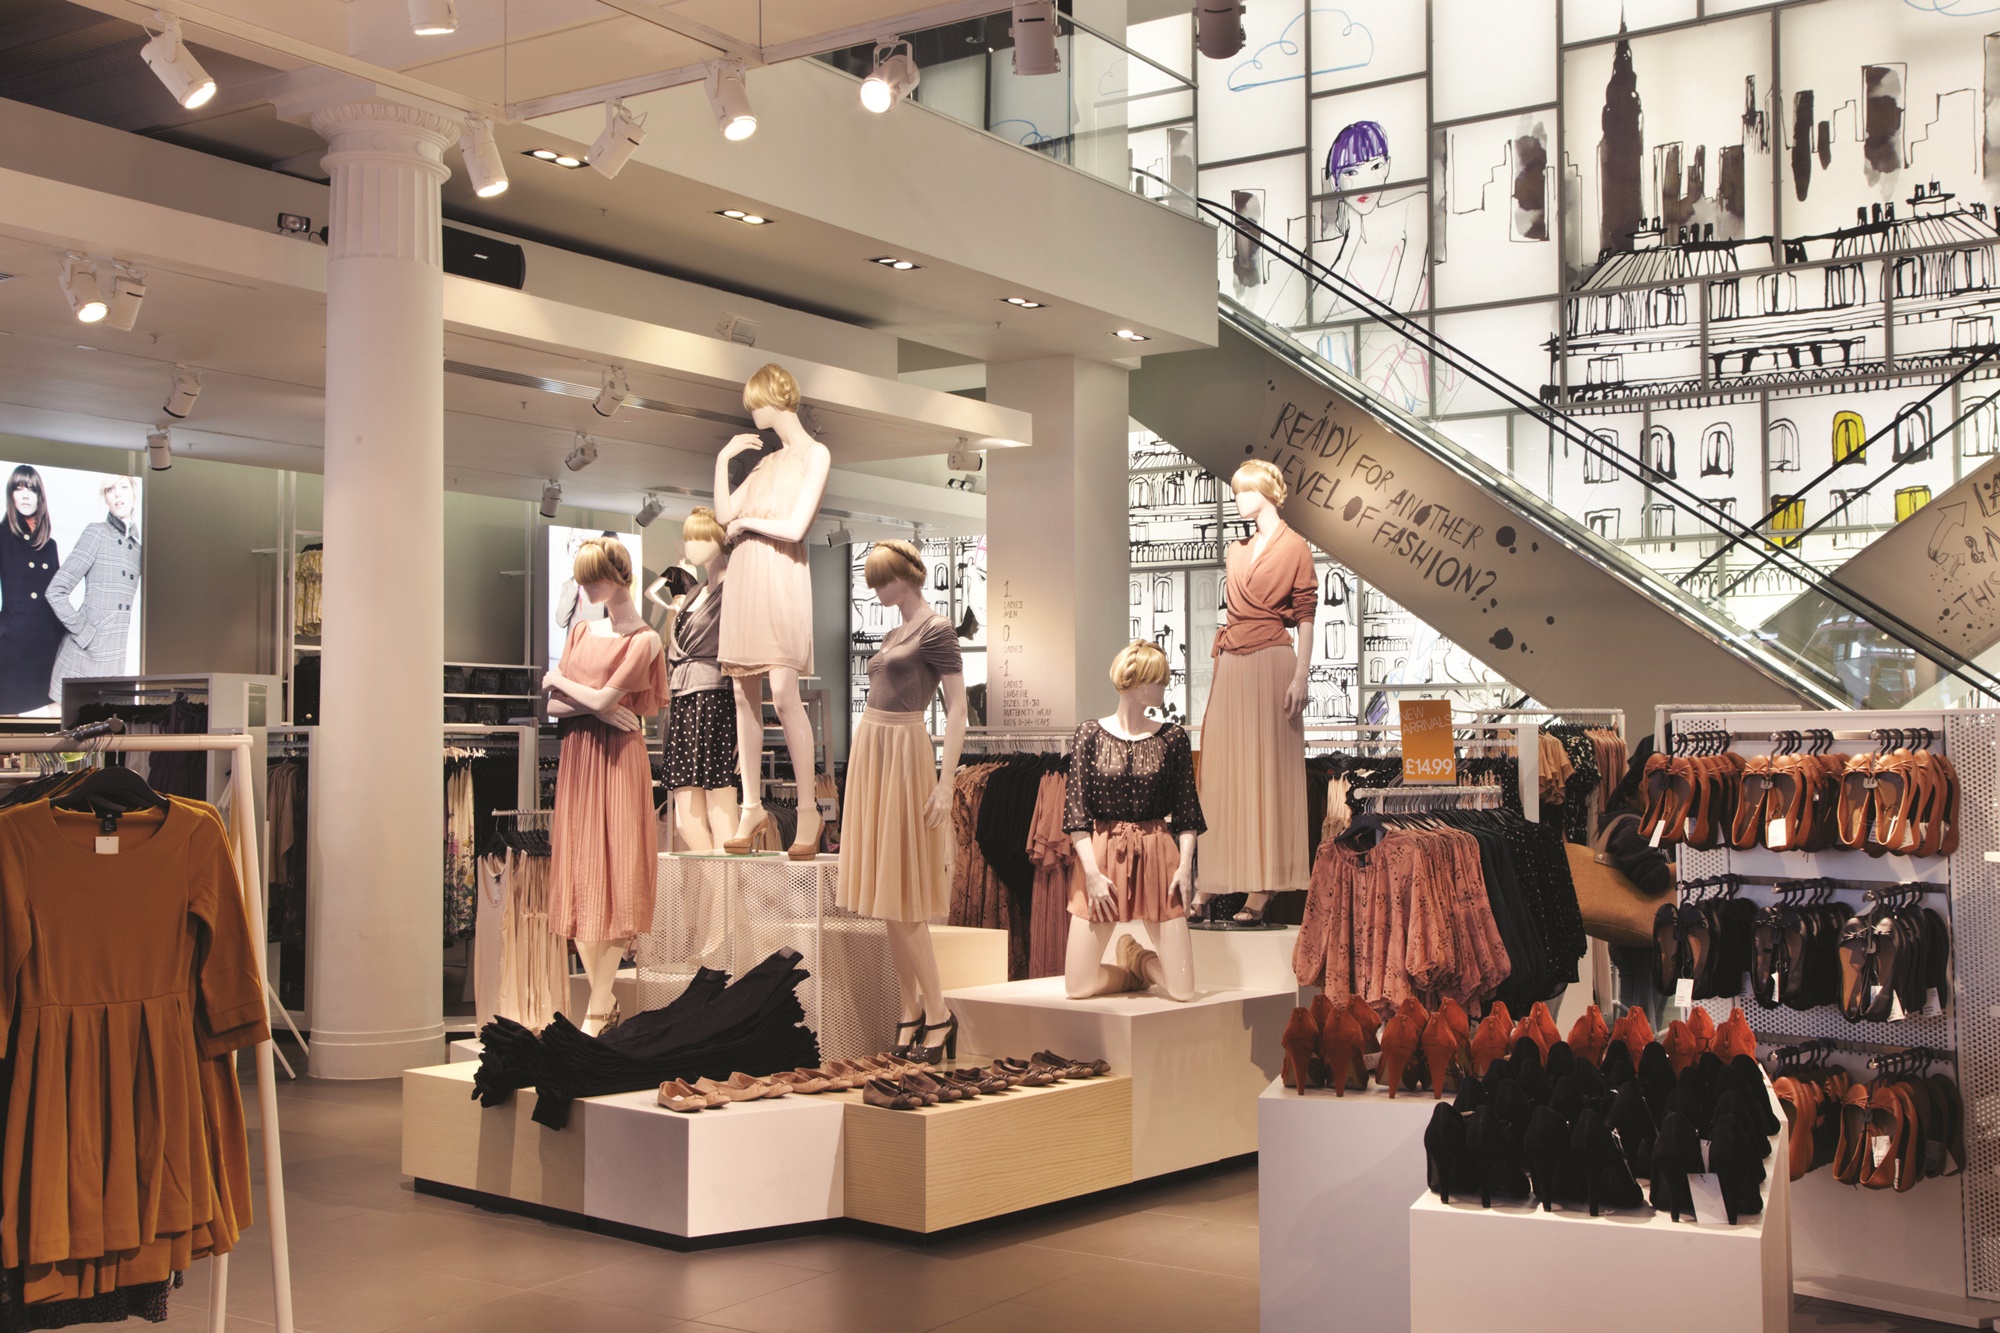 What is visual merchandising? How to make use of display space and